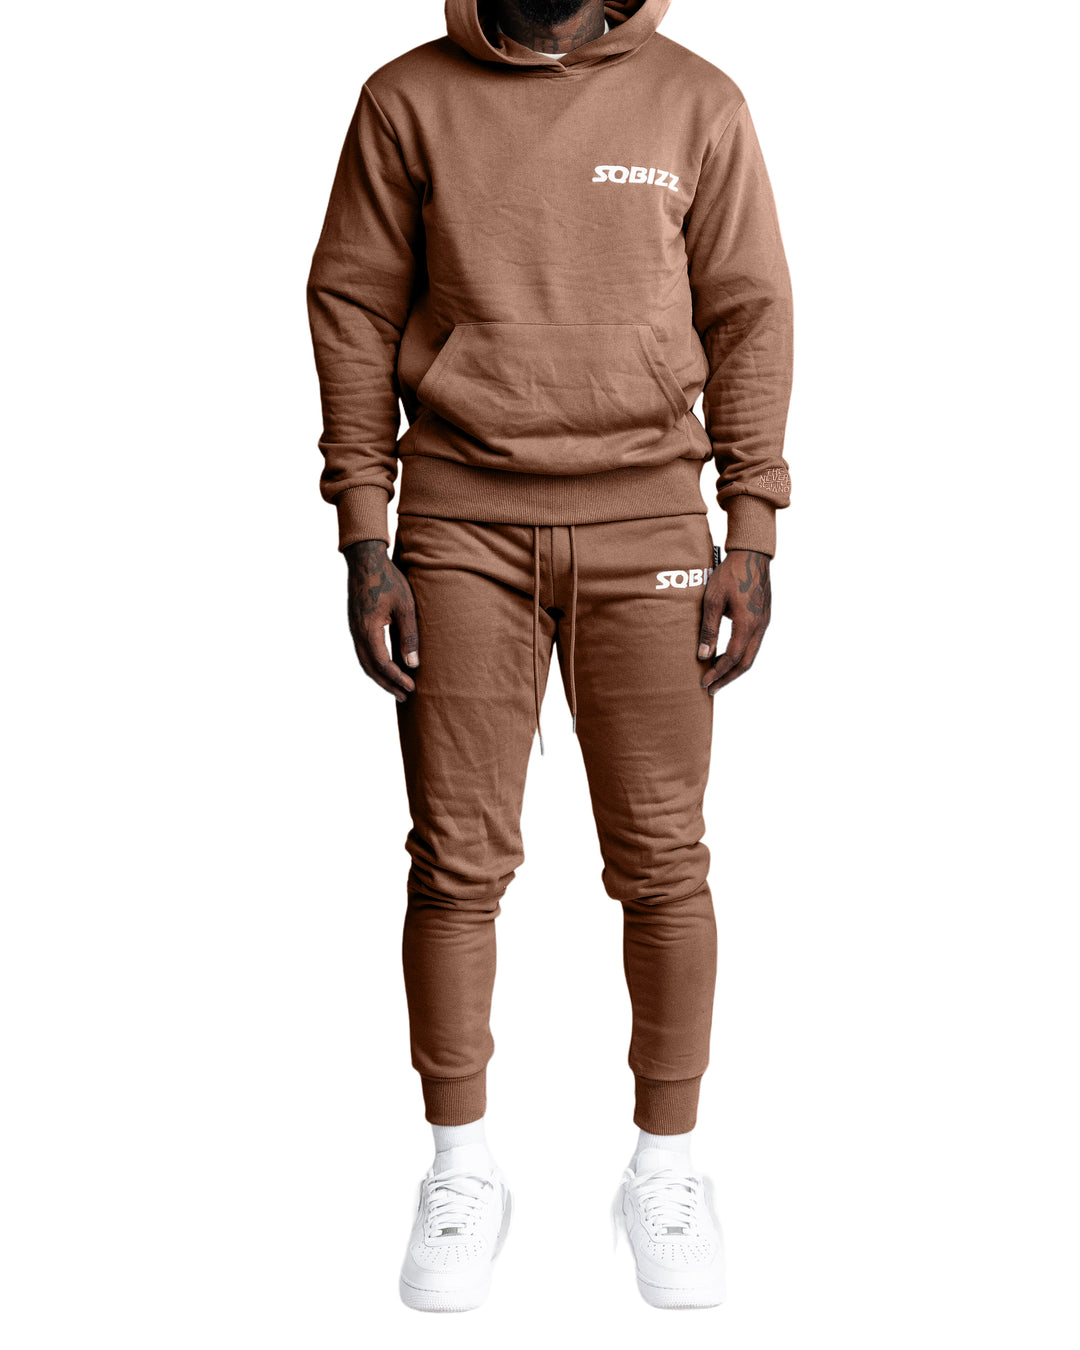 Essential Joggers in Light Brown/White